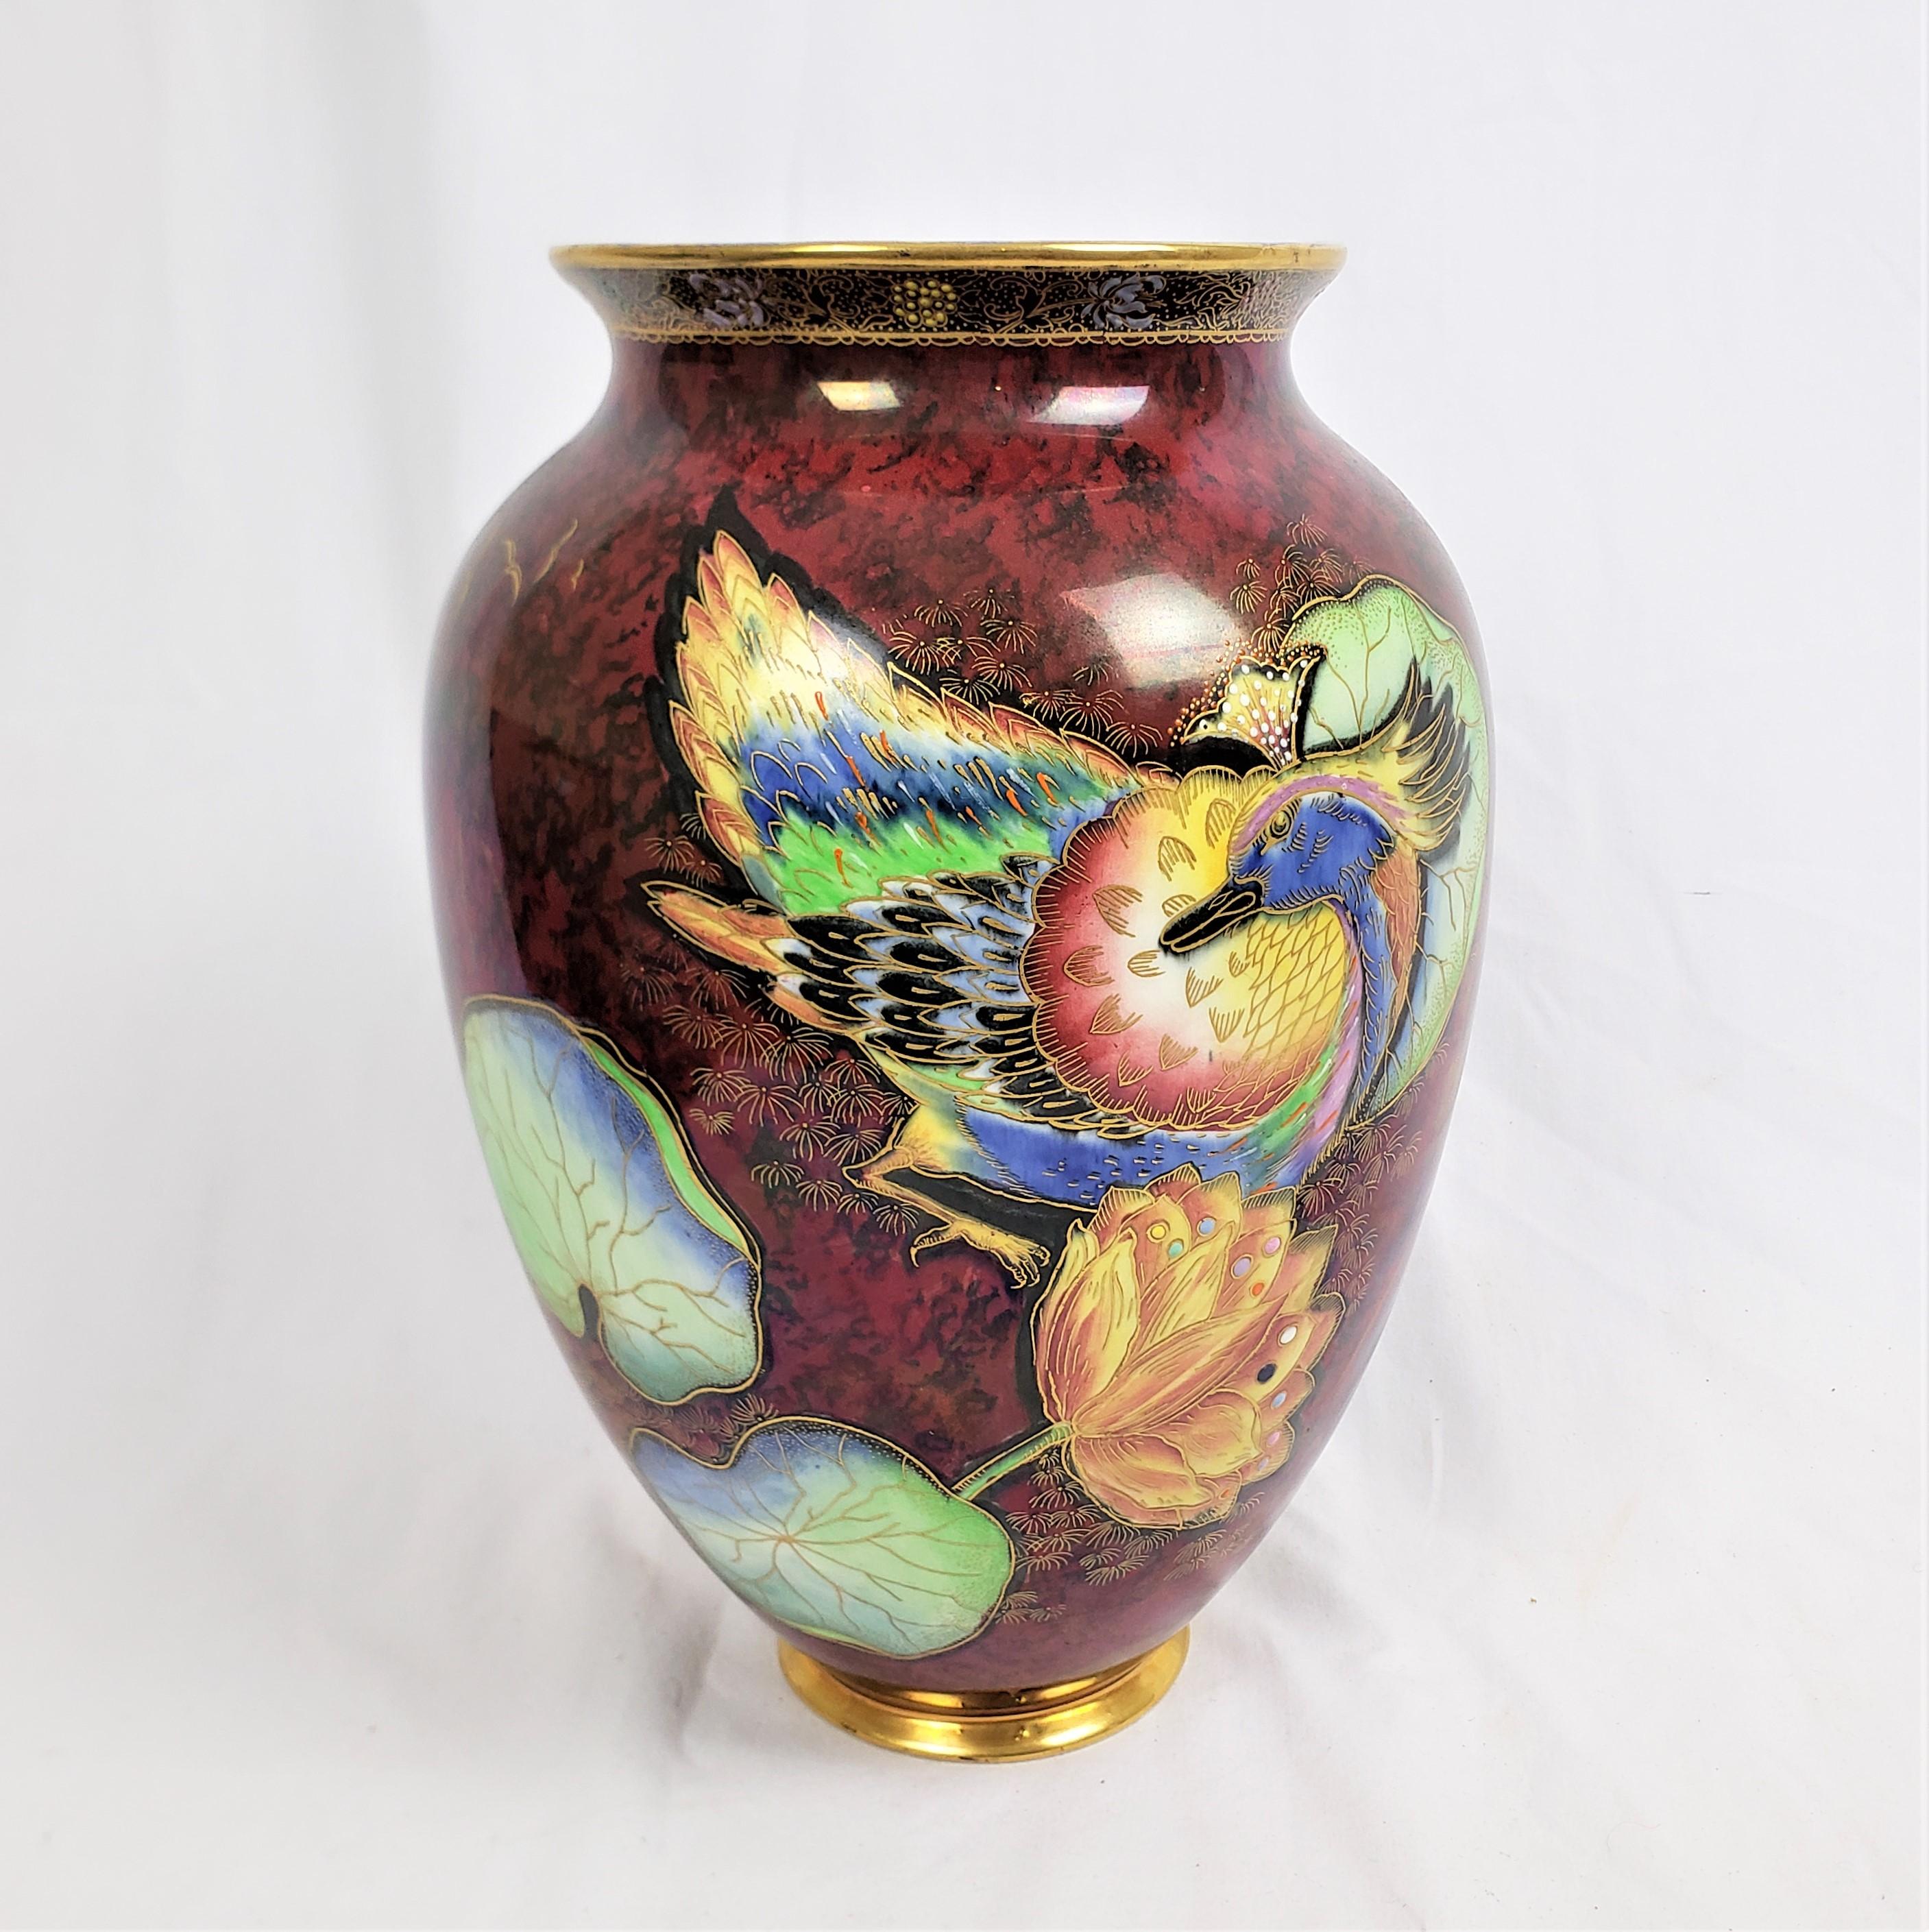 This antique vase was made by the renowned Carlton Ware factory of England in approximately 1920 and done in the period Asian inspired style. The vase is done in pottery with a mottled black and burgundy ground with vibrantly colored exotic birds